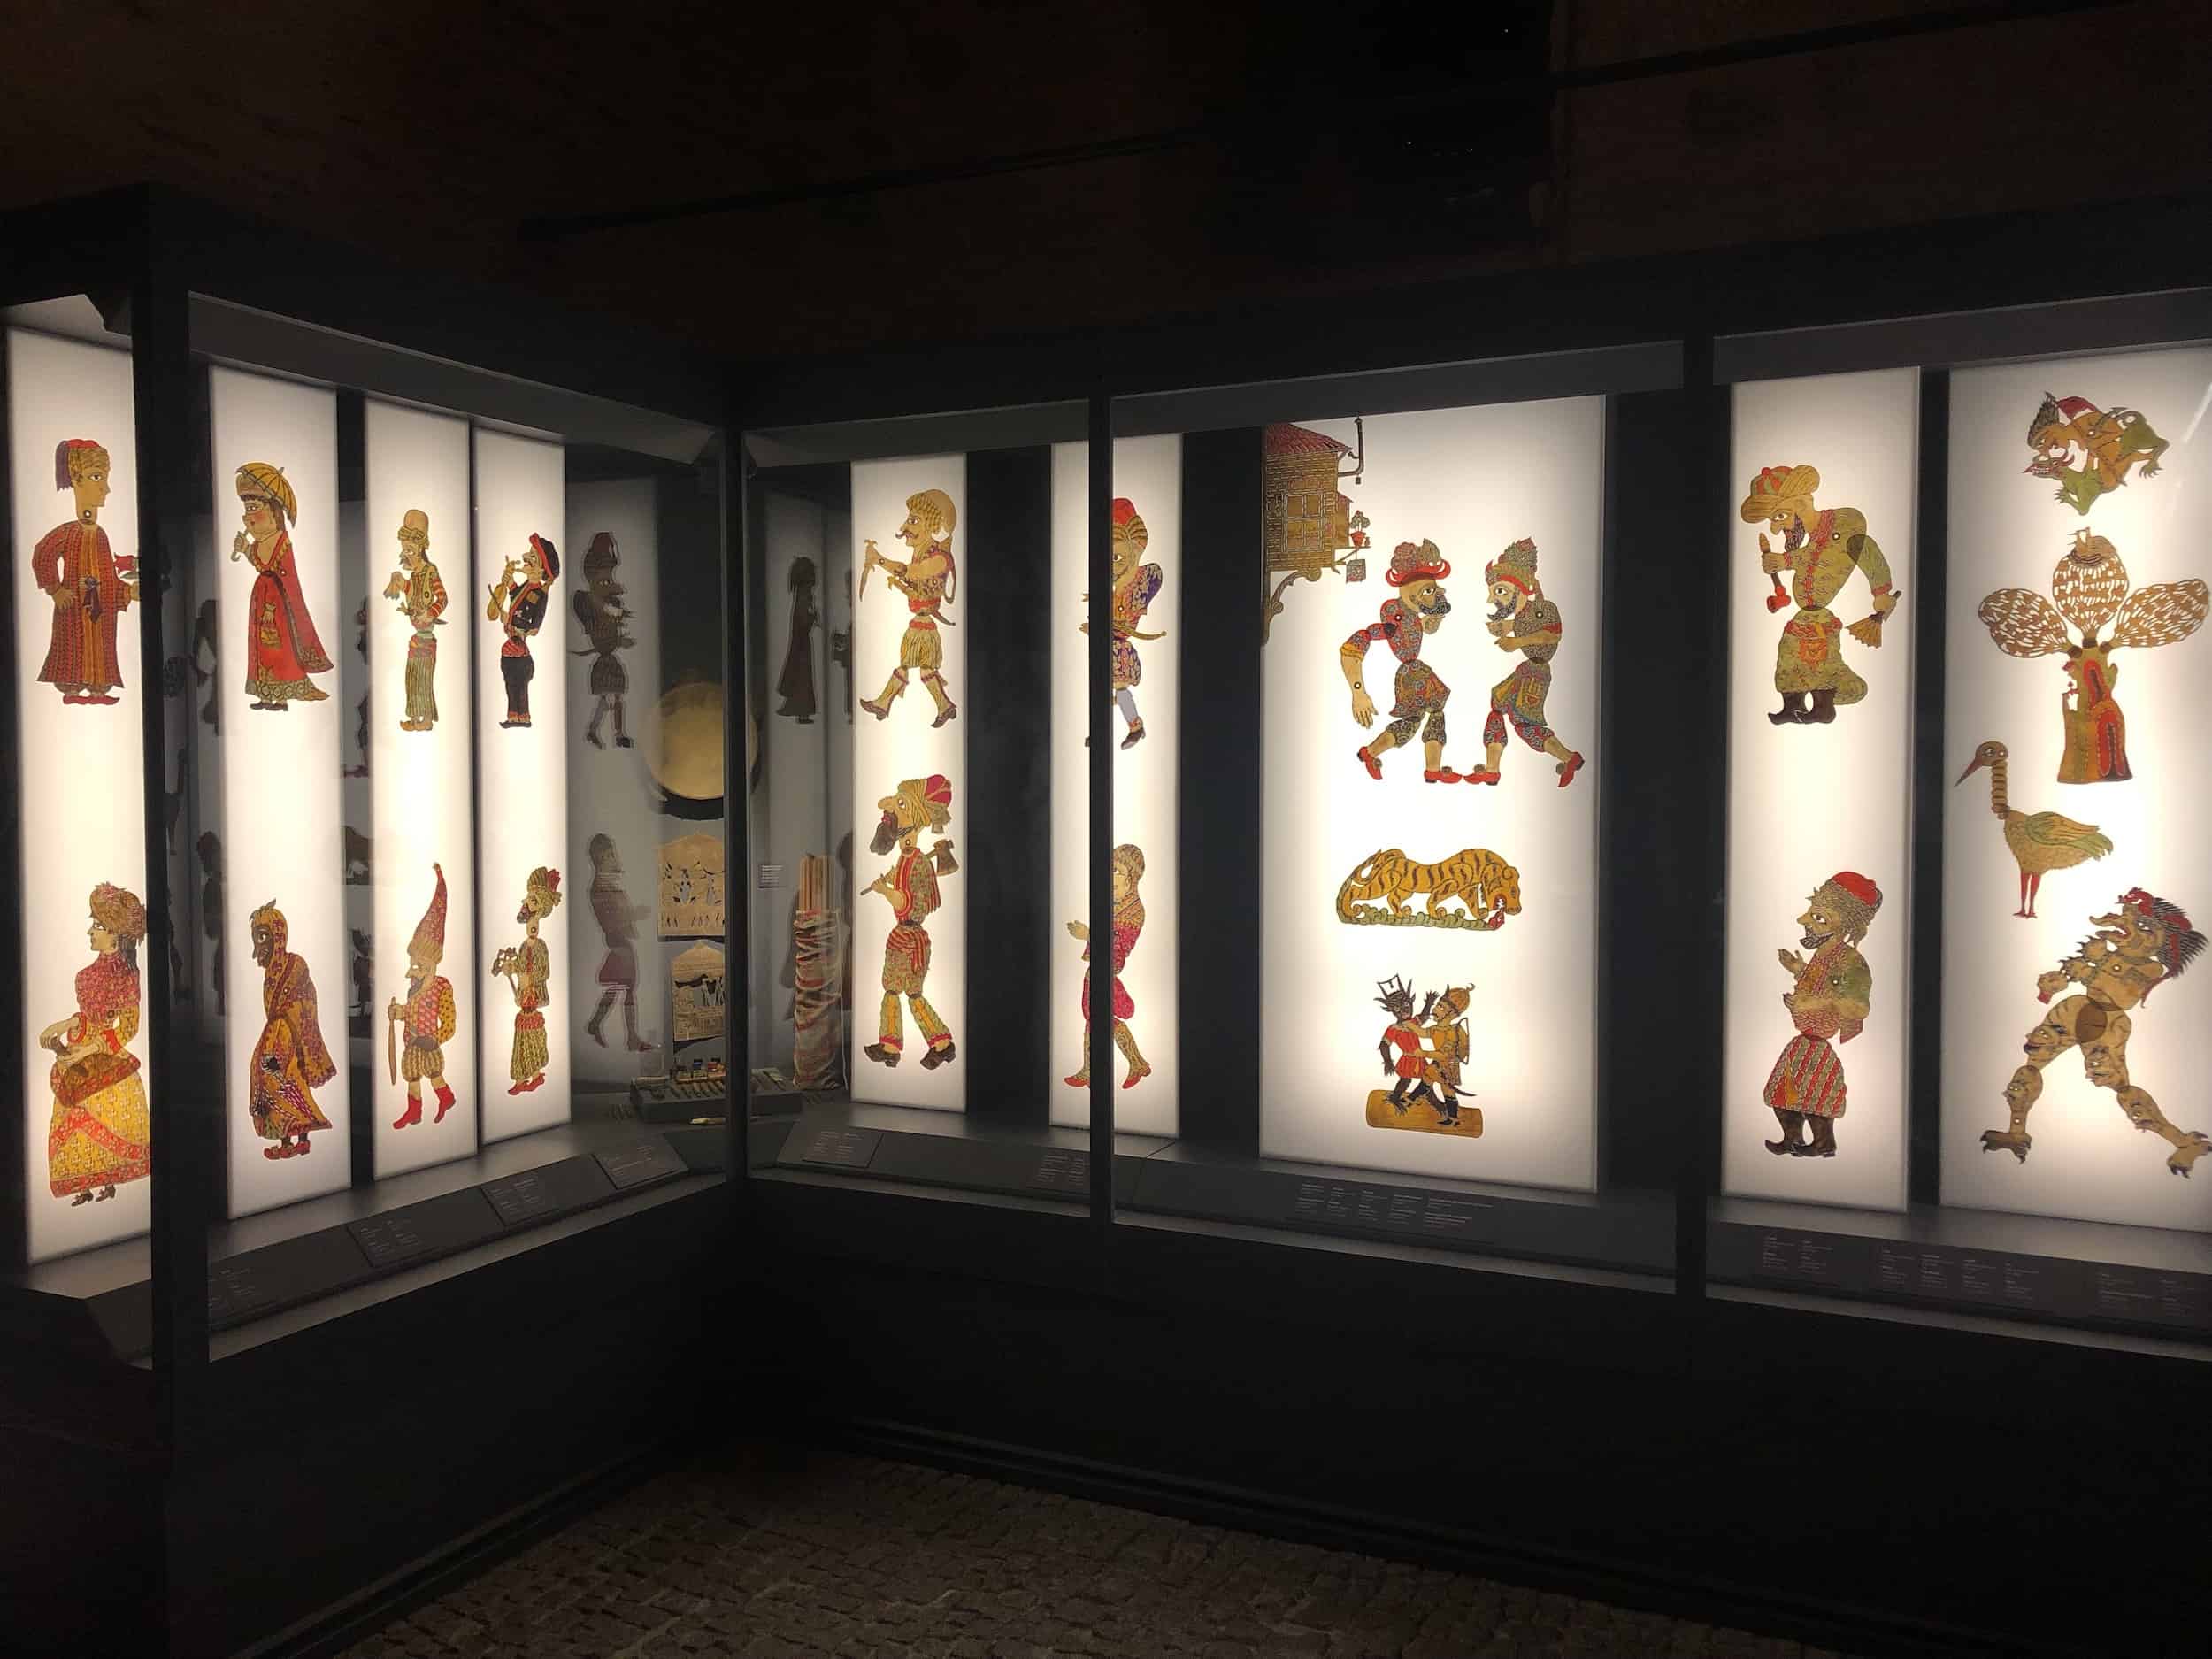 Shadow puppets in the ethnographic collection at the Museum of Turkish and Islamic Arts in Istanbul, Turkey